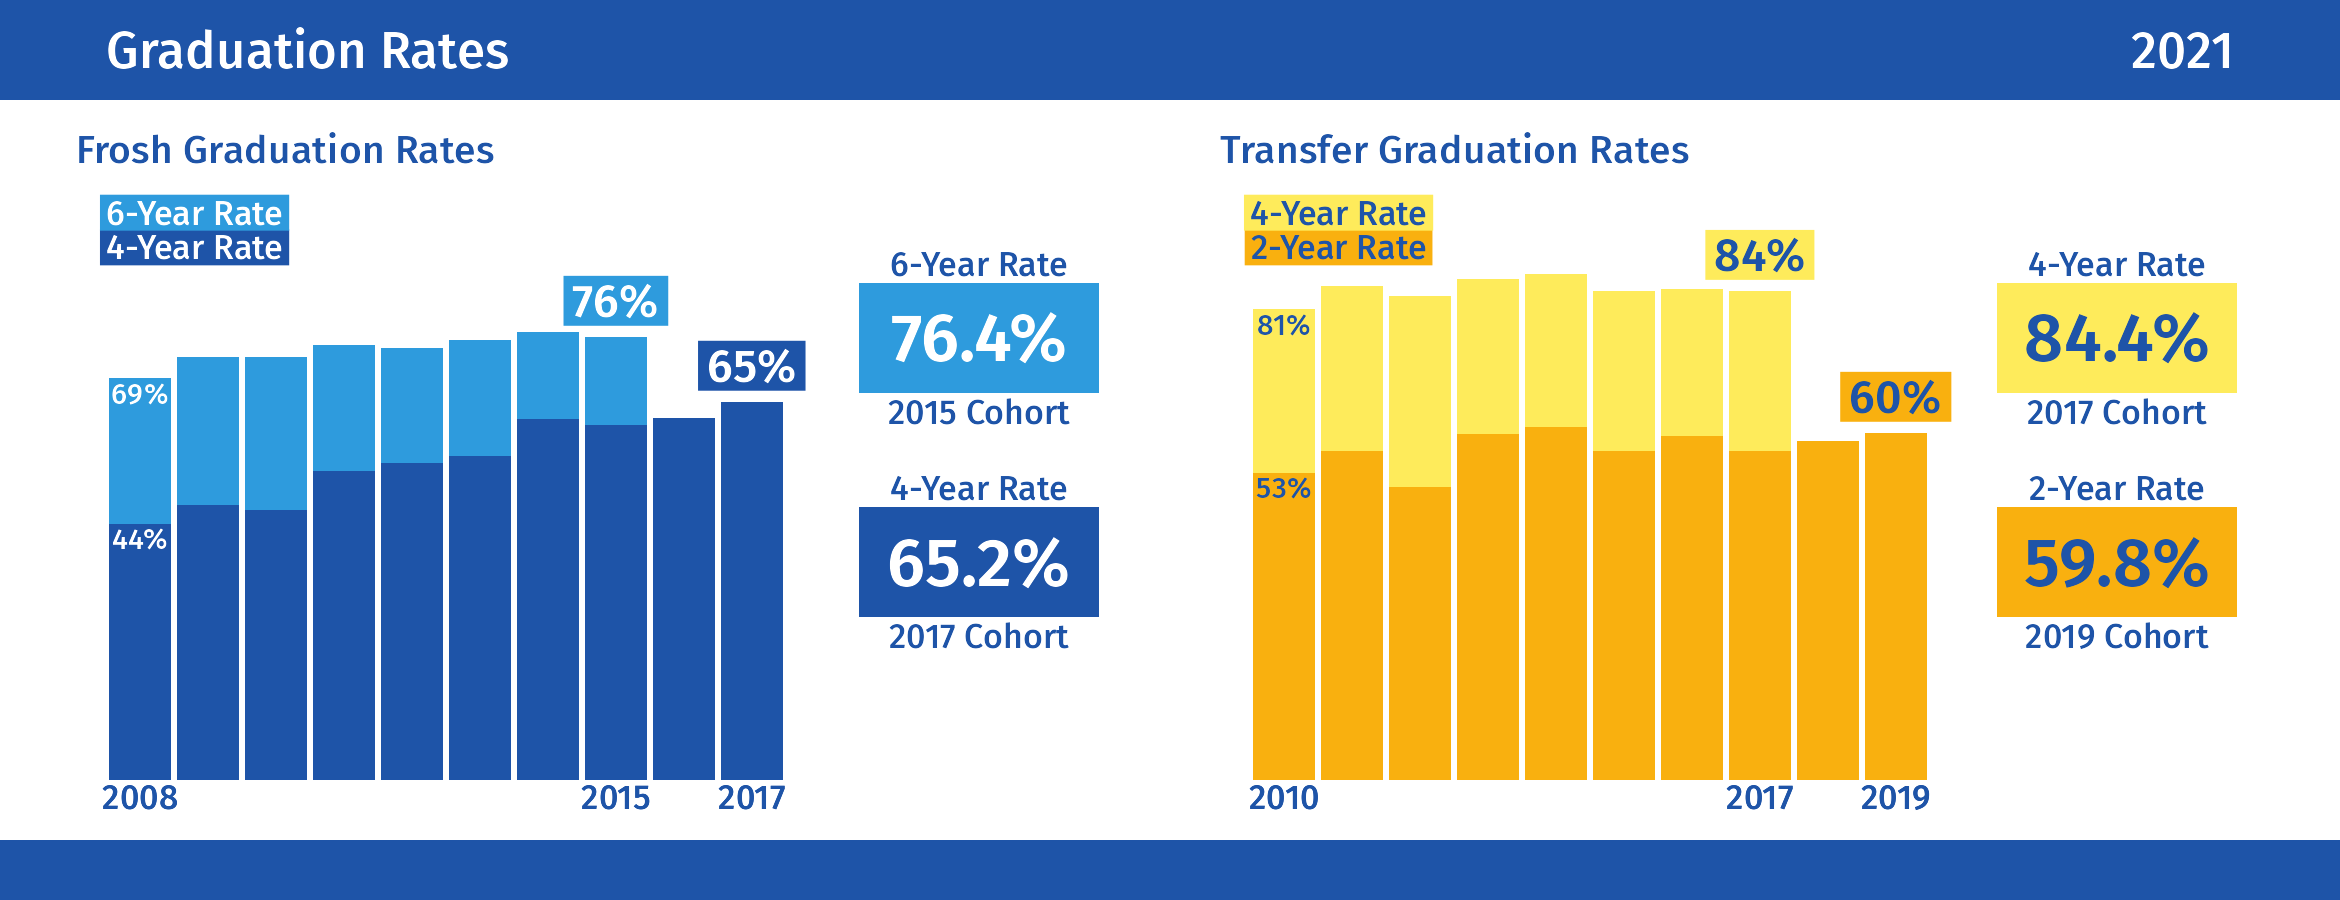 Graduation Rates: For additional details on graduation rates and other student outcome metrics, click to explore our Student Outcomes dashboards.